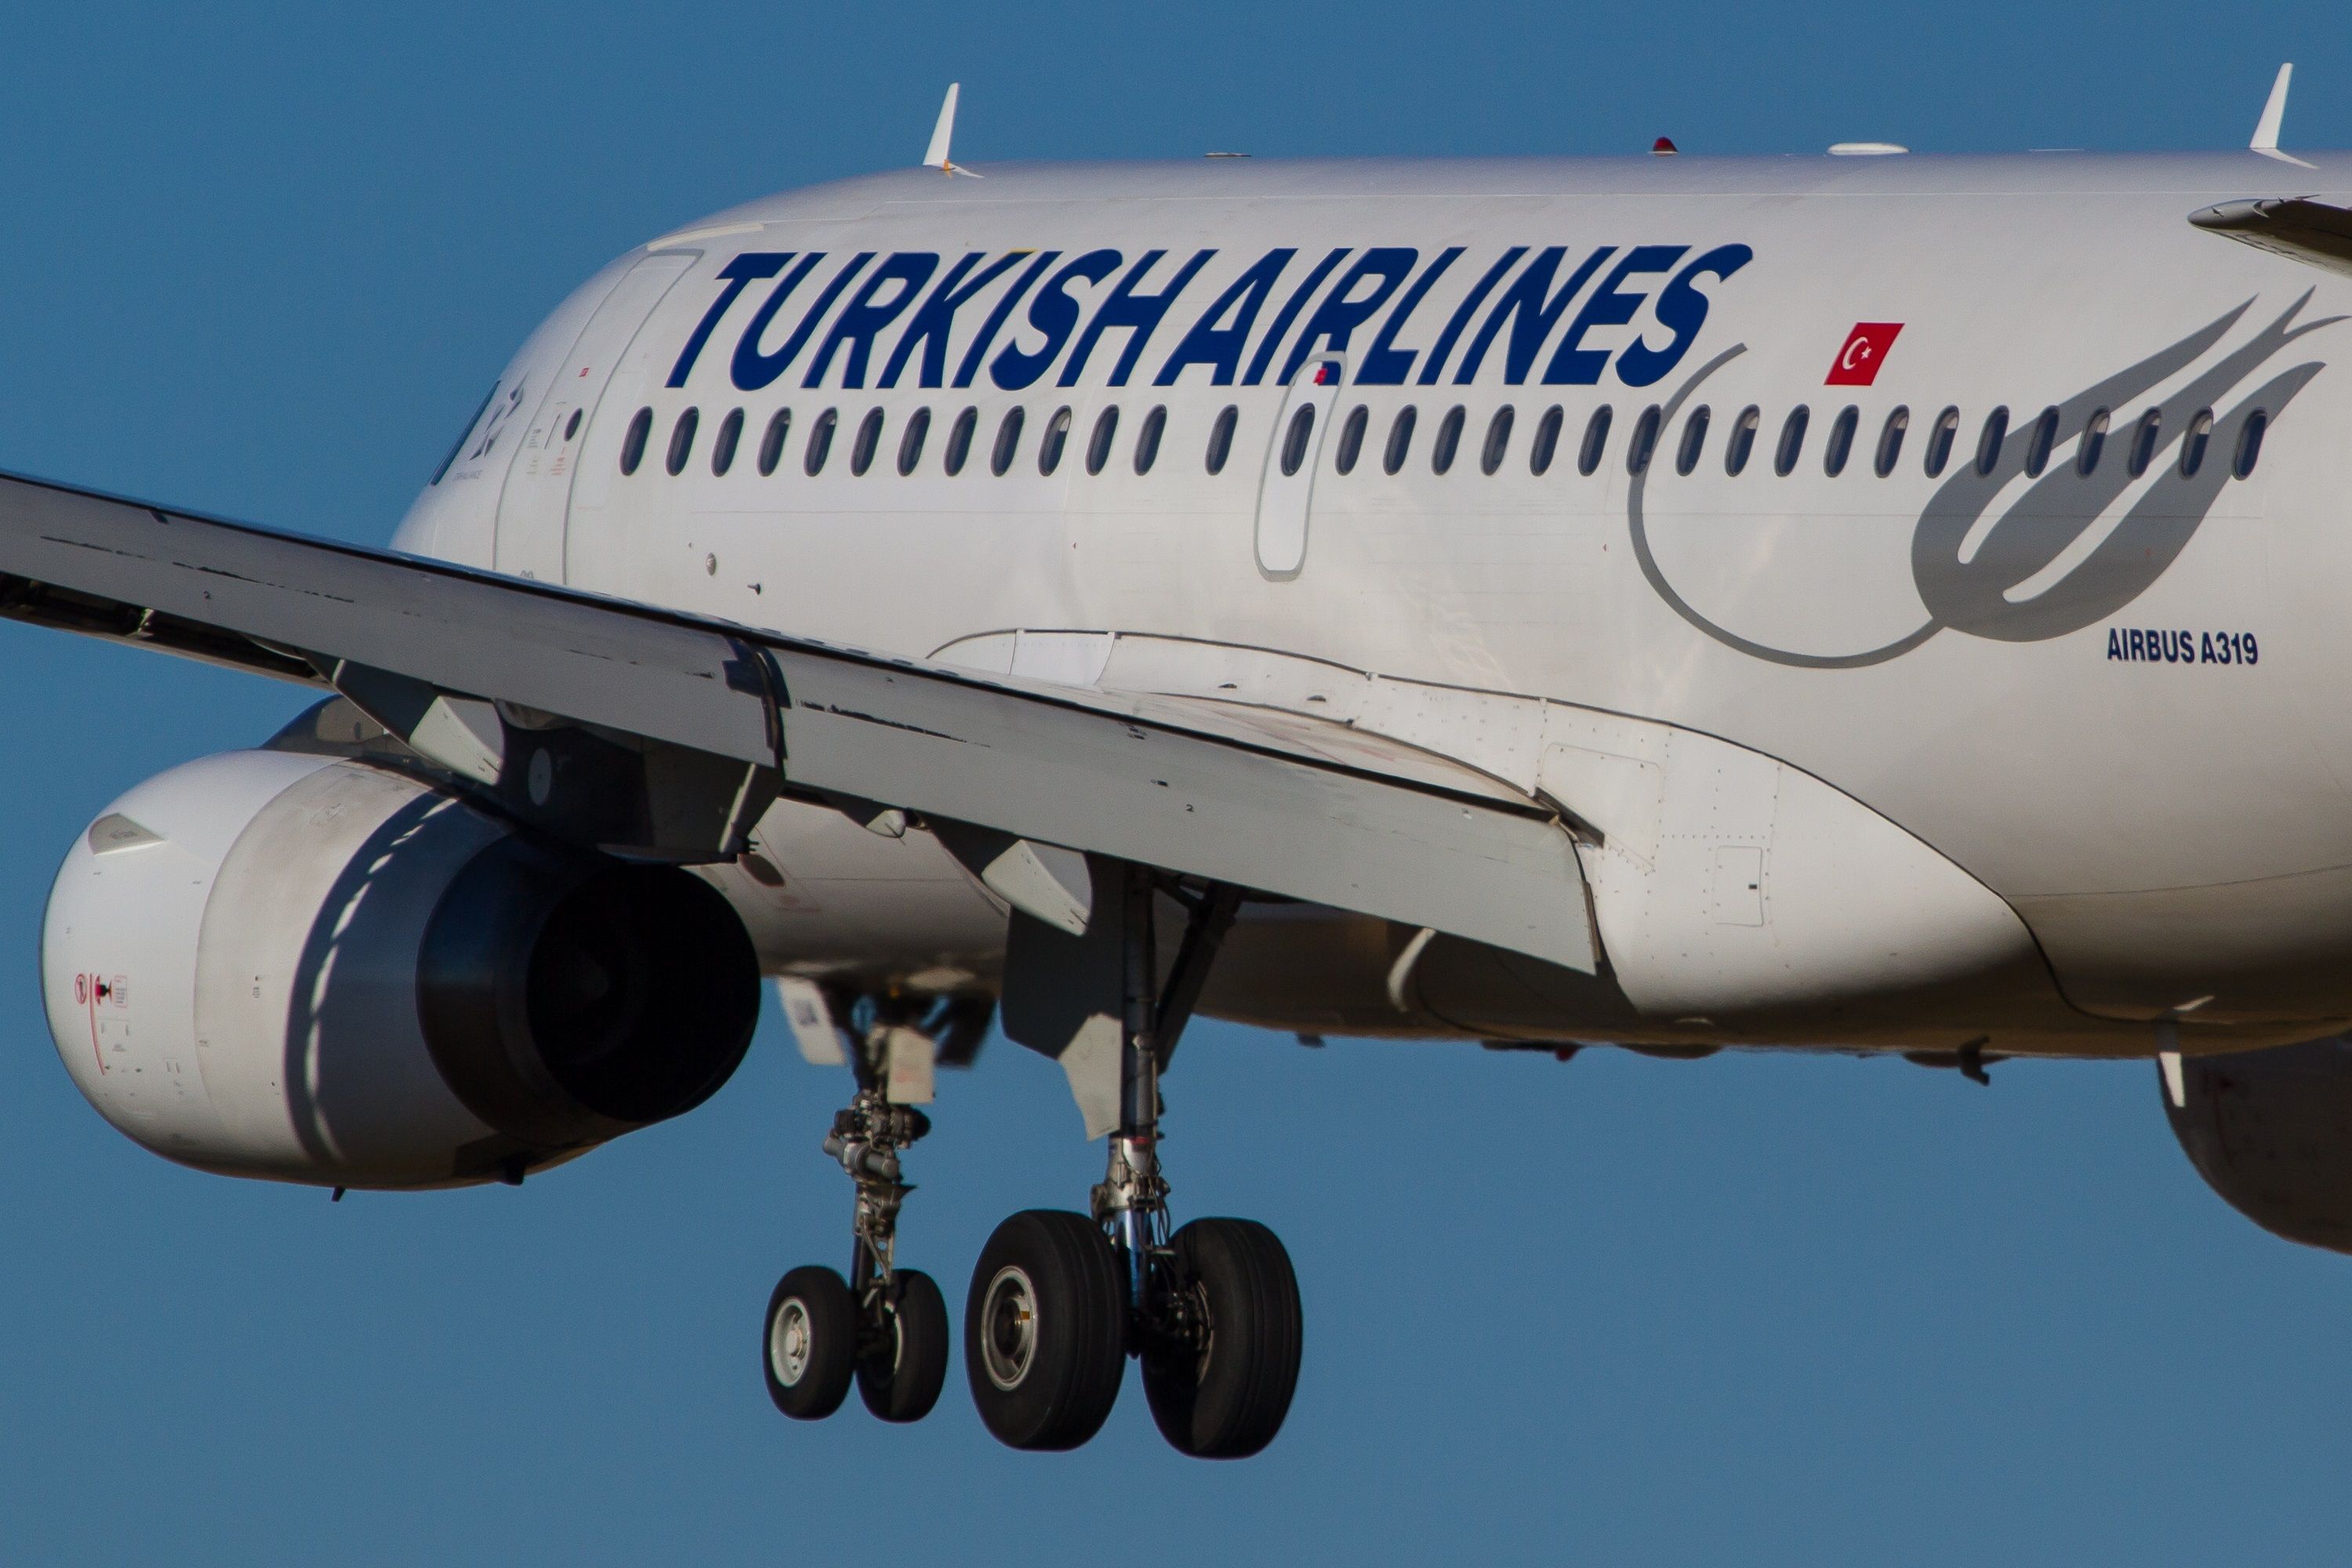 Turkish Airlines A319 landing